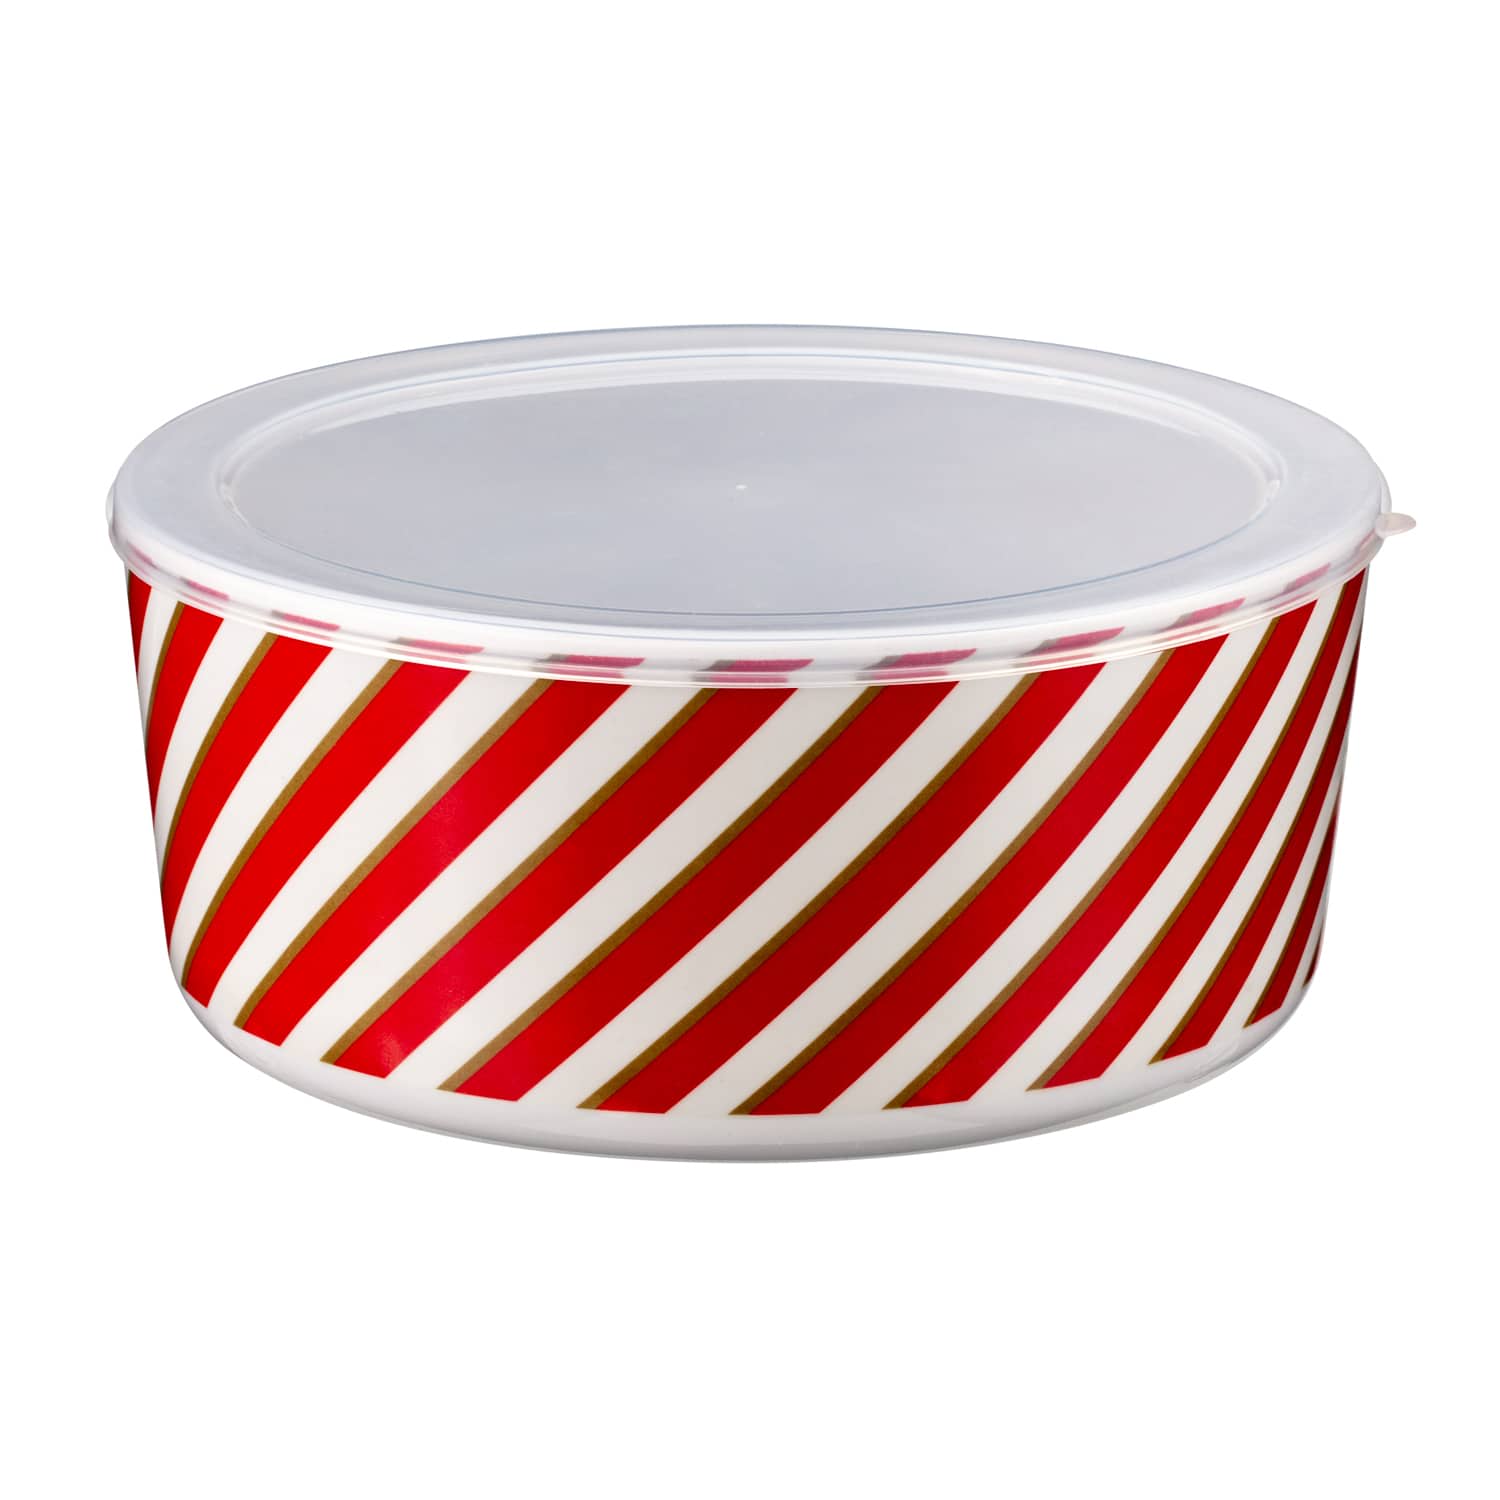 https://www.christmasunique.com/wp-content/uploads/2022/10/387953-christmas-food-storage-containers-2pk-6.jpg